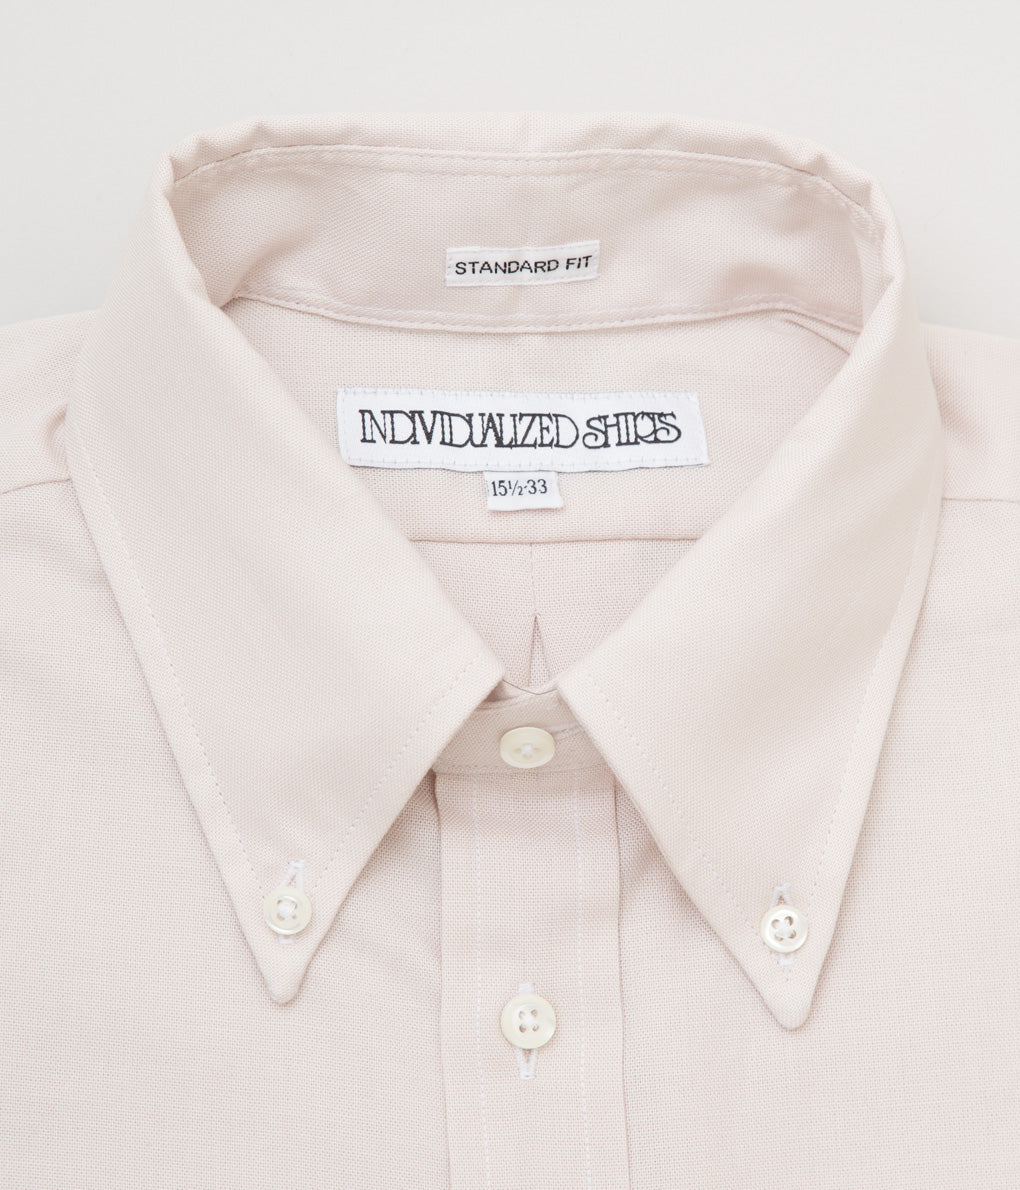 INDIVIDUALIZED SHIRTS "HERITAGE CHAMBRAY (STANDARD FIT BUTTON DOWN SHIRT)" (BEIGE)